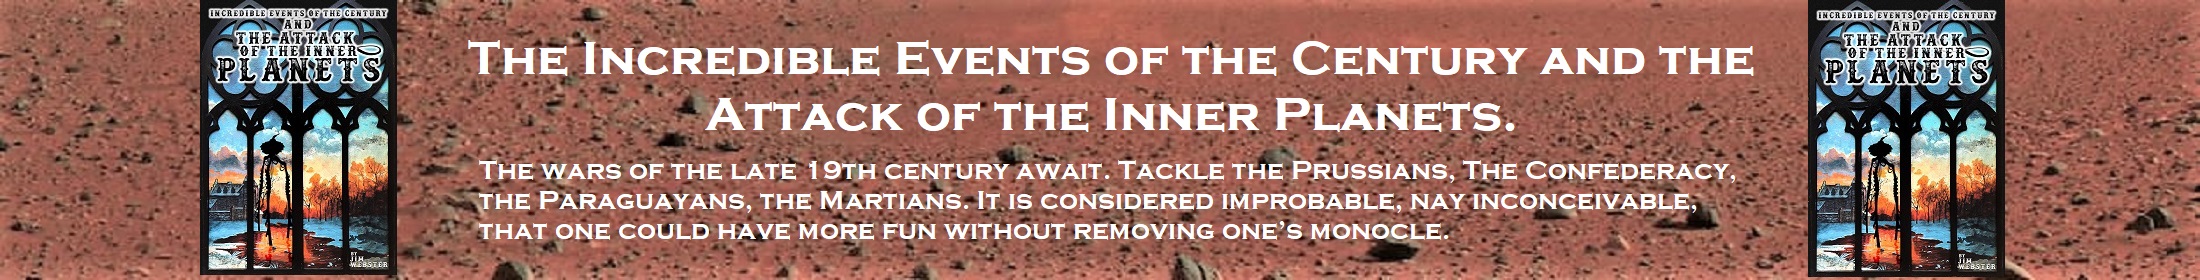 The Incredible Events of the Century and the Attack of the Inner Planets